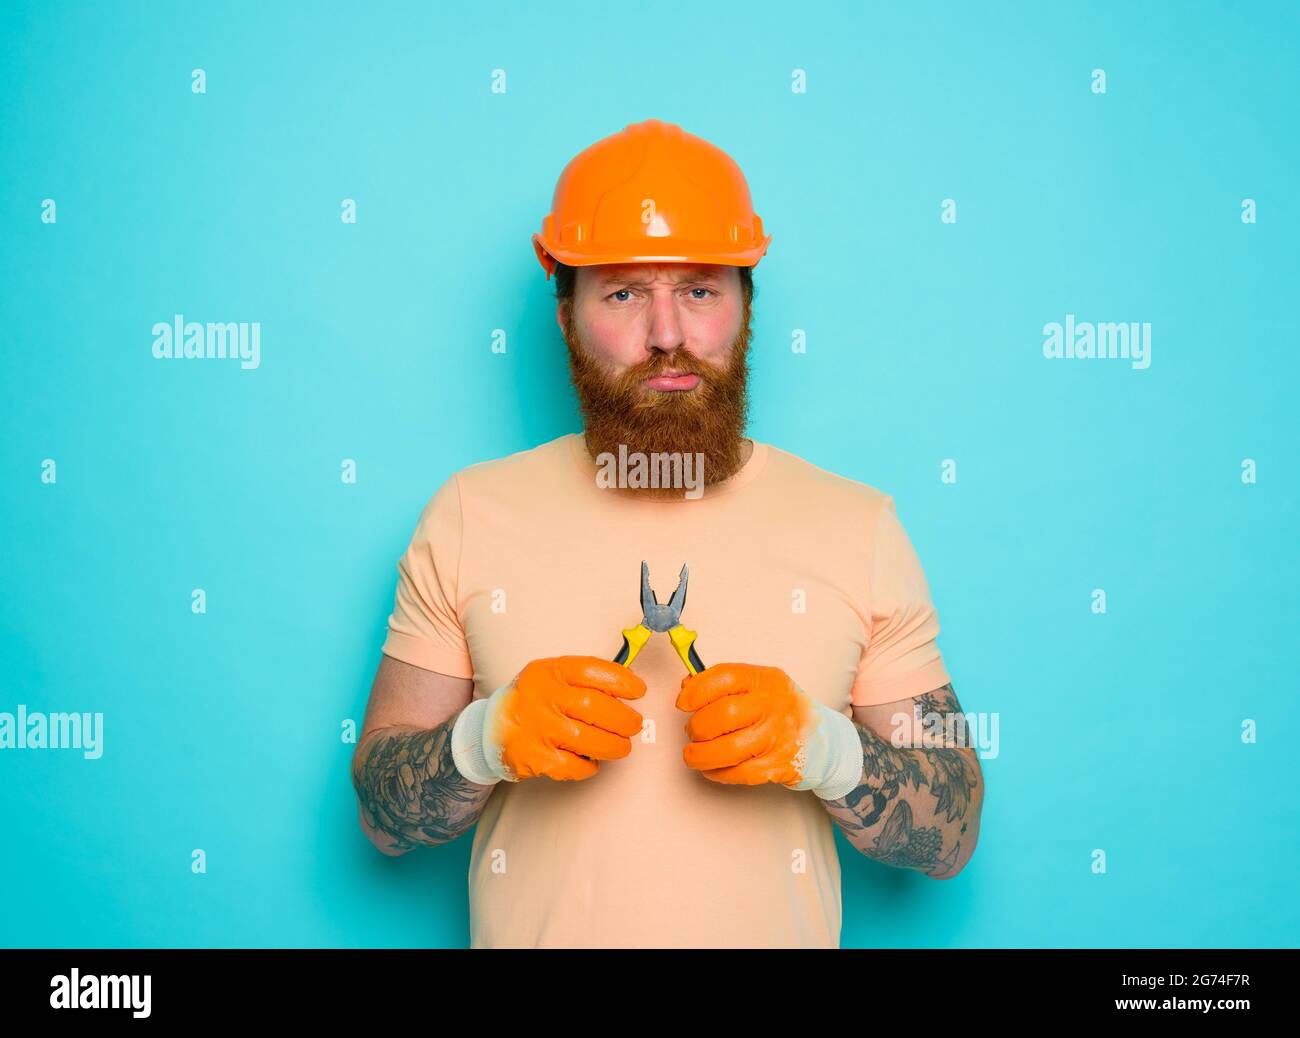 Incompetent worker is unsure and confused about his work Stock Photo